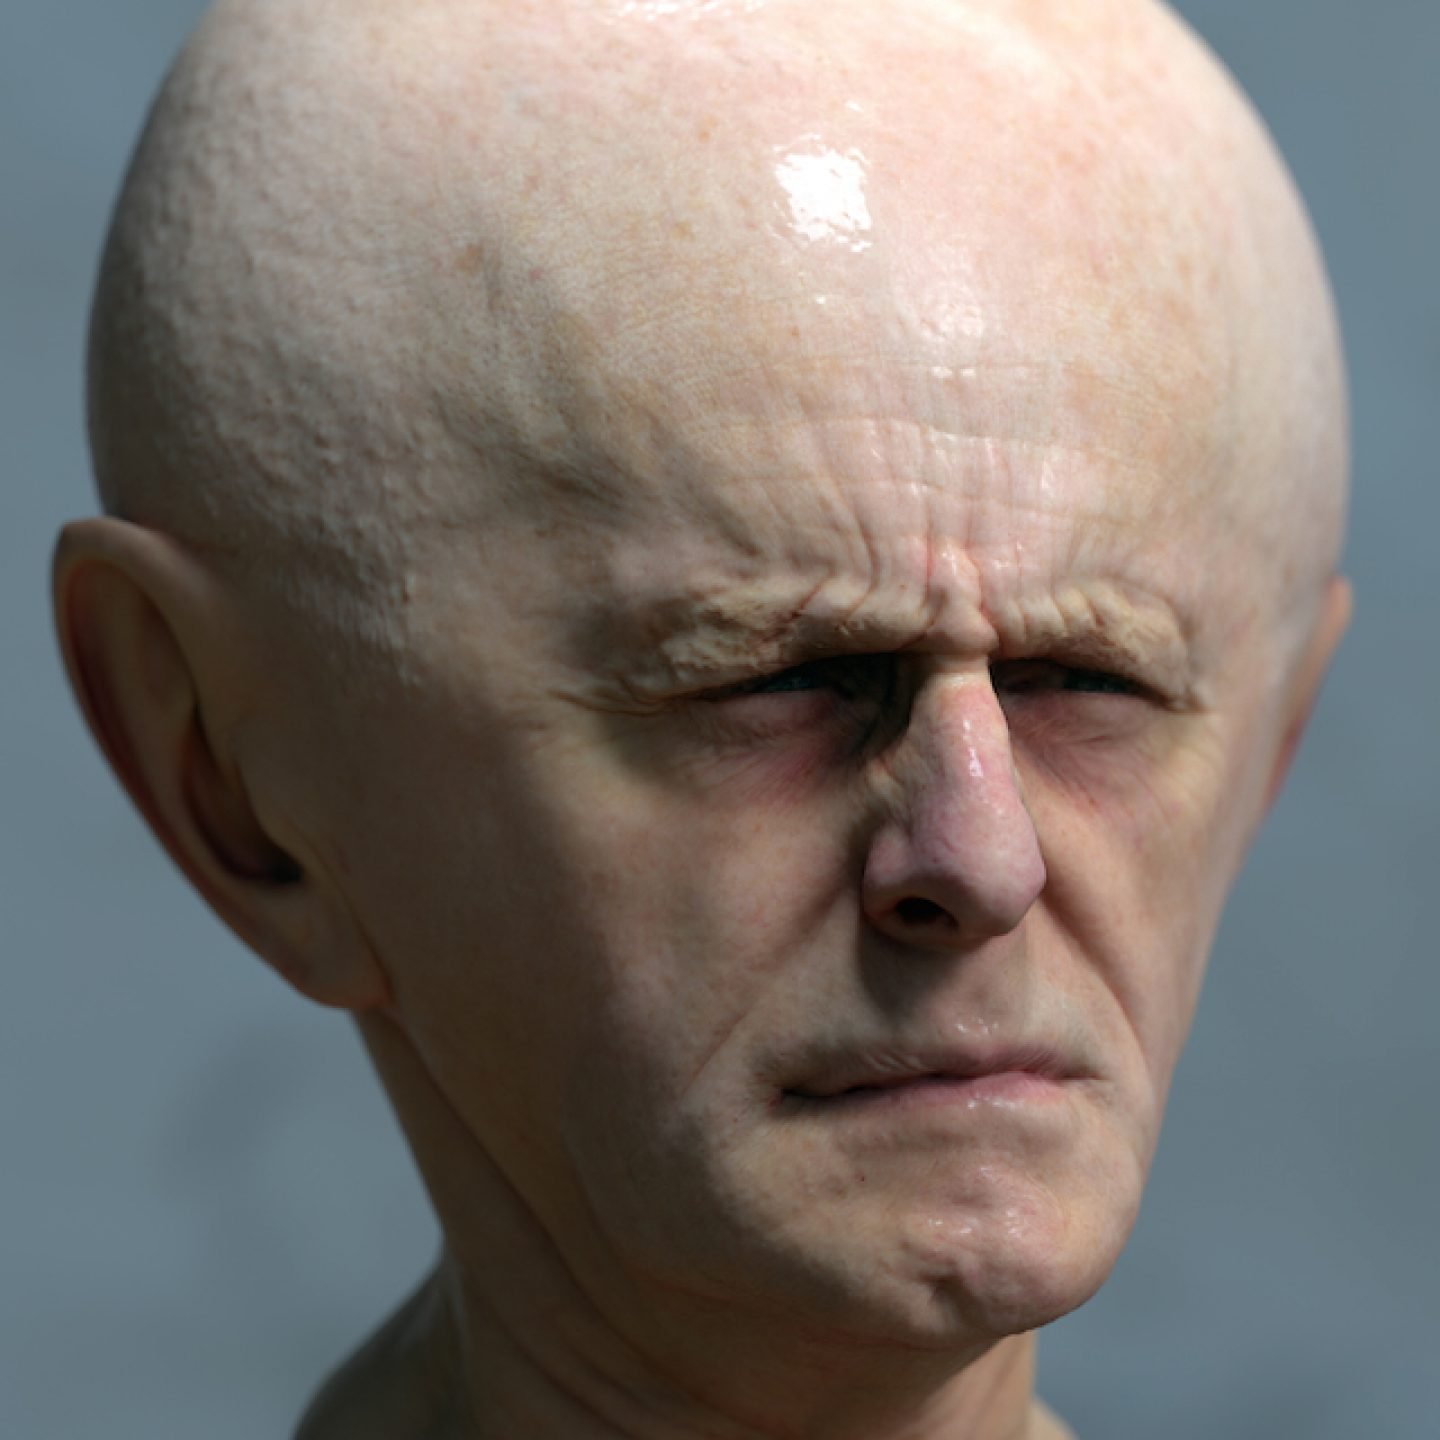 Blockheads Bubbleheads And Other Deformations By Lee Griggs Ignant